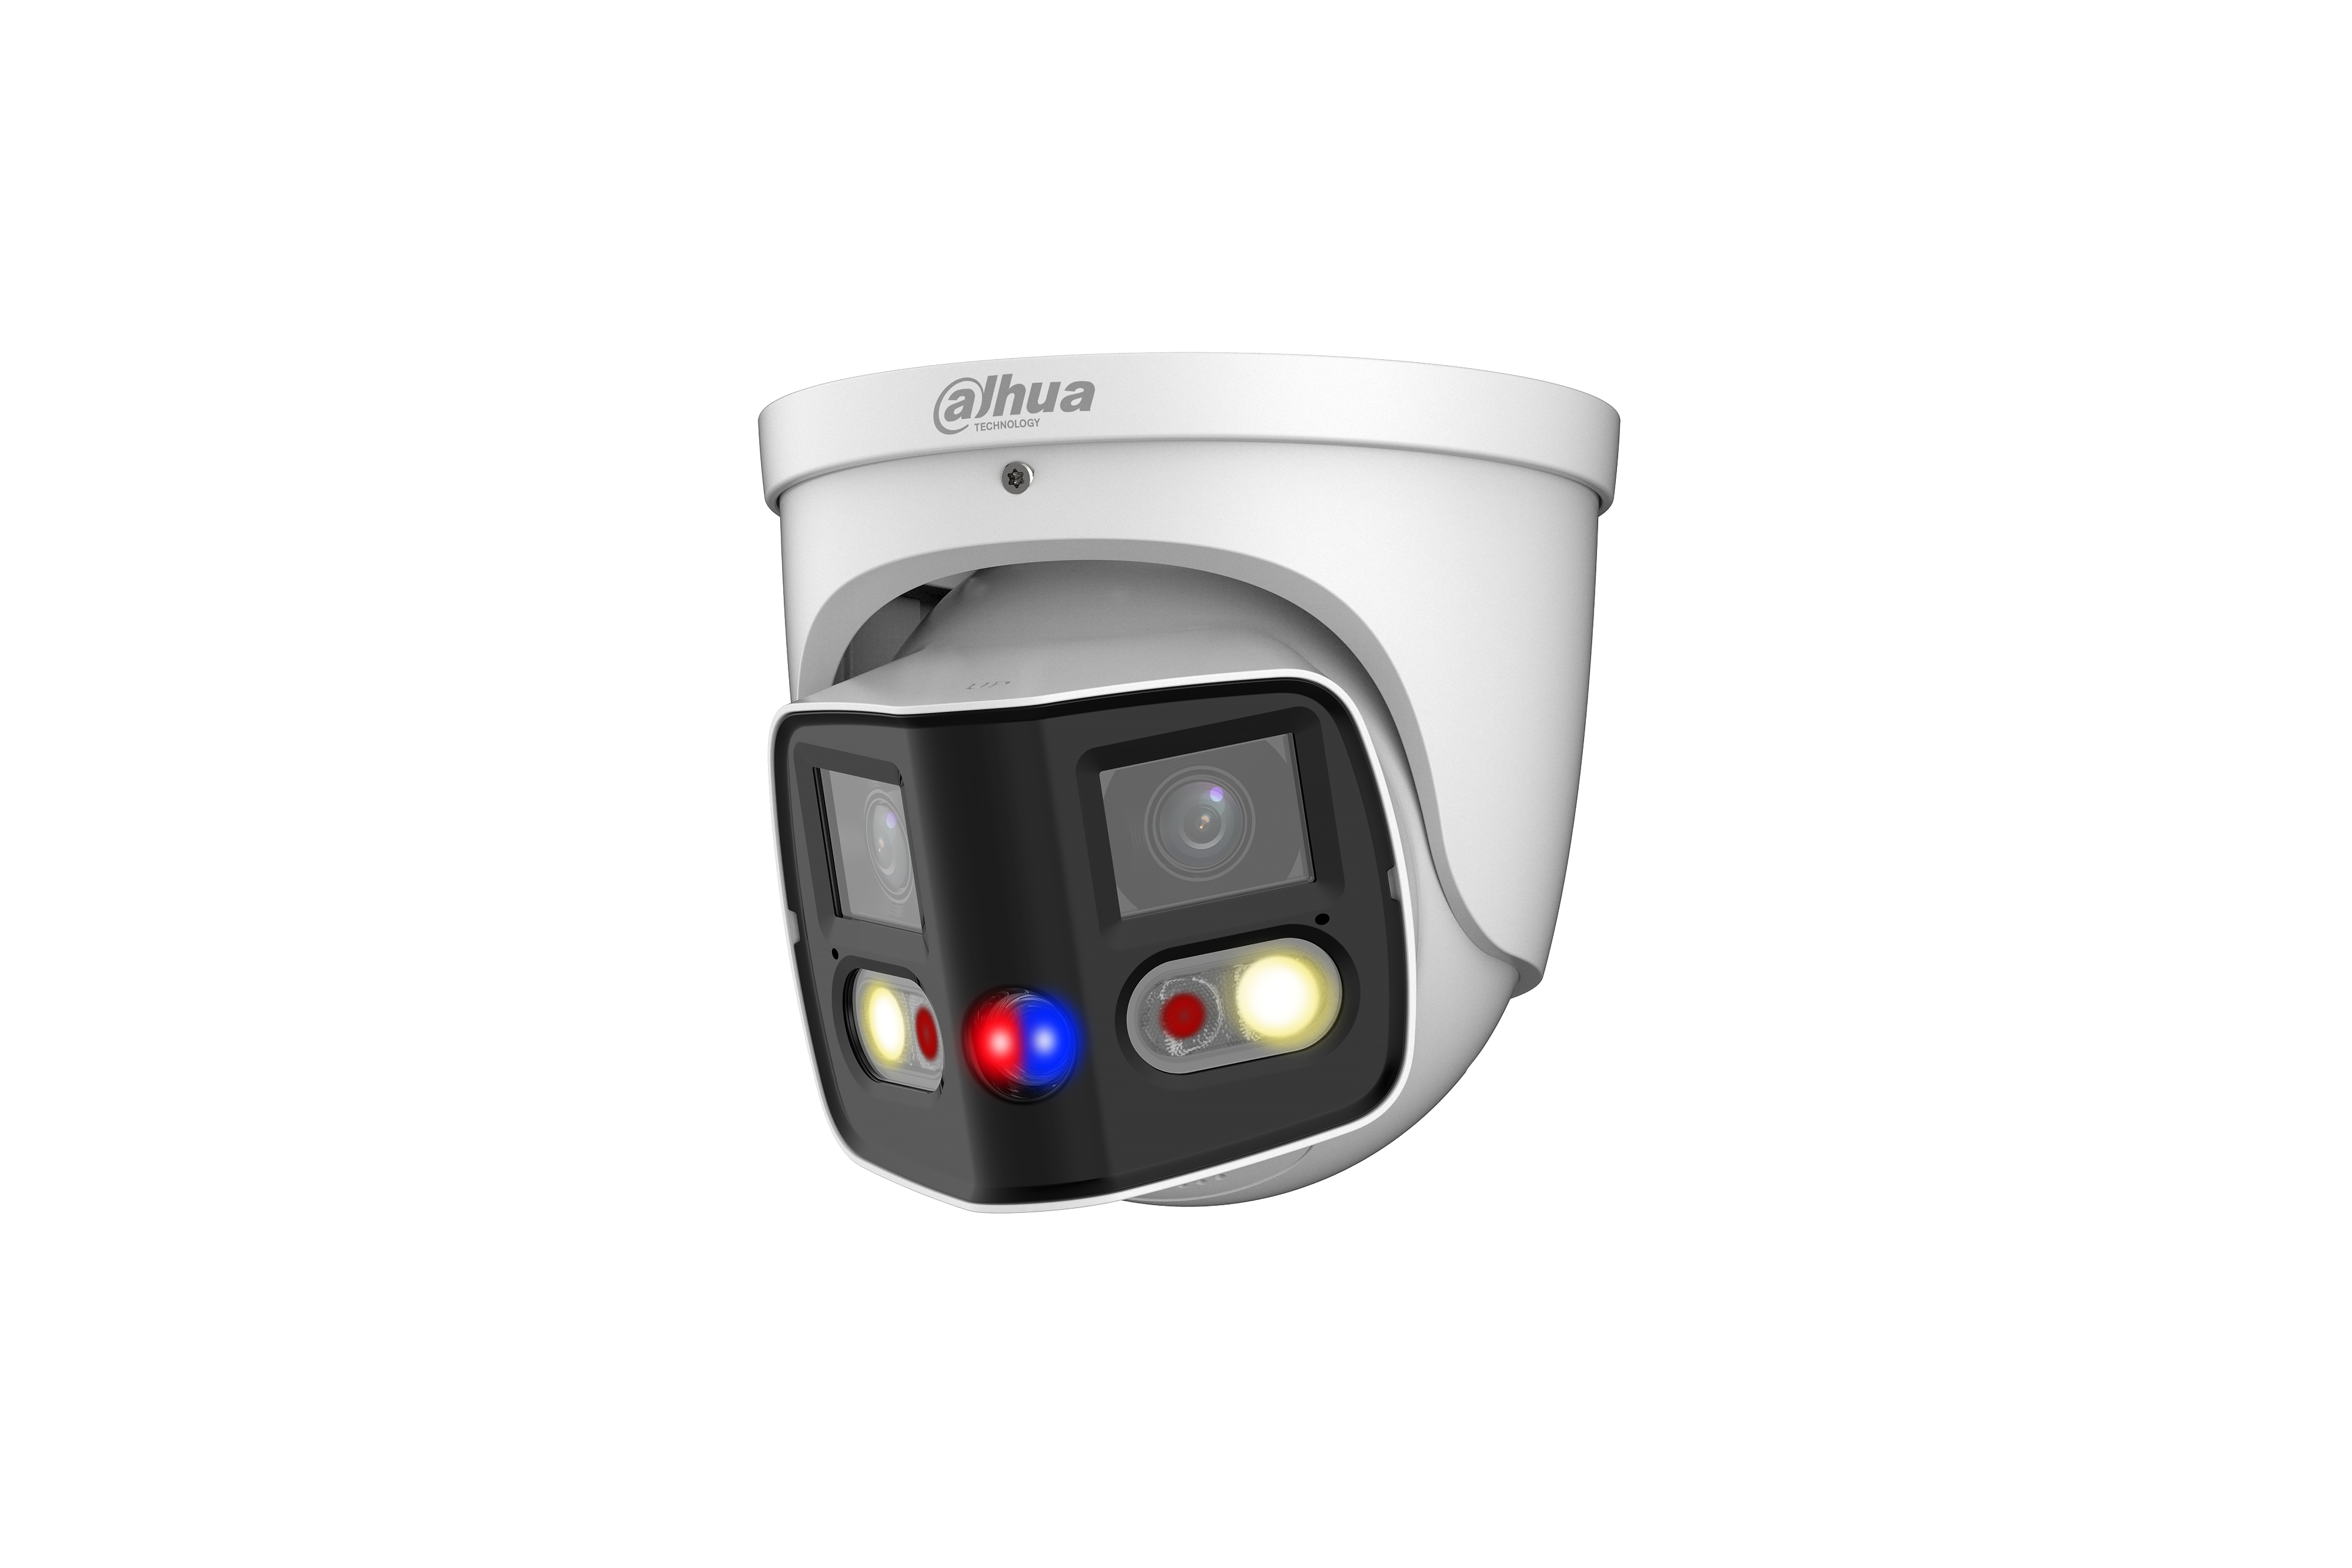 WIZSENSE SERIES IP CAMERA WHITE AI 180° TIOC DUO WITH EPTZ 2x4MP H.264/4+/5/5+ DUAL LENS 120 WDR METAL 2.8MM FIXED LENS FULL COLOUR IR+WHITE LED 20M POE IP67 BUILT IN MIC AUDIO IN AUDIO OUT 1 x ALARM IN 1 x ALARM OUT SUPPORT UP TO 256GB SD 12VDC